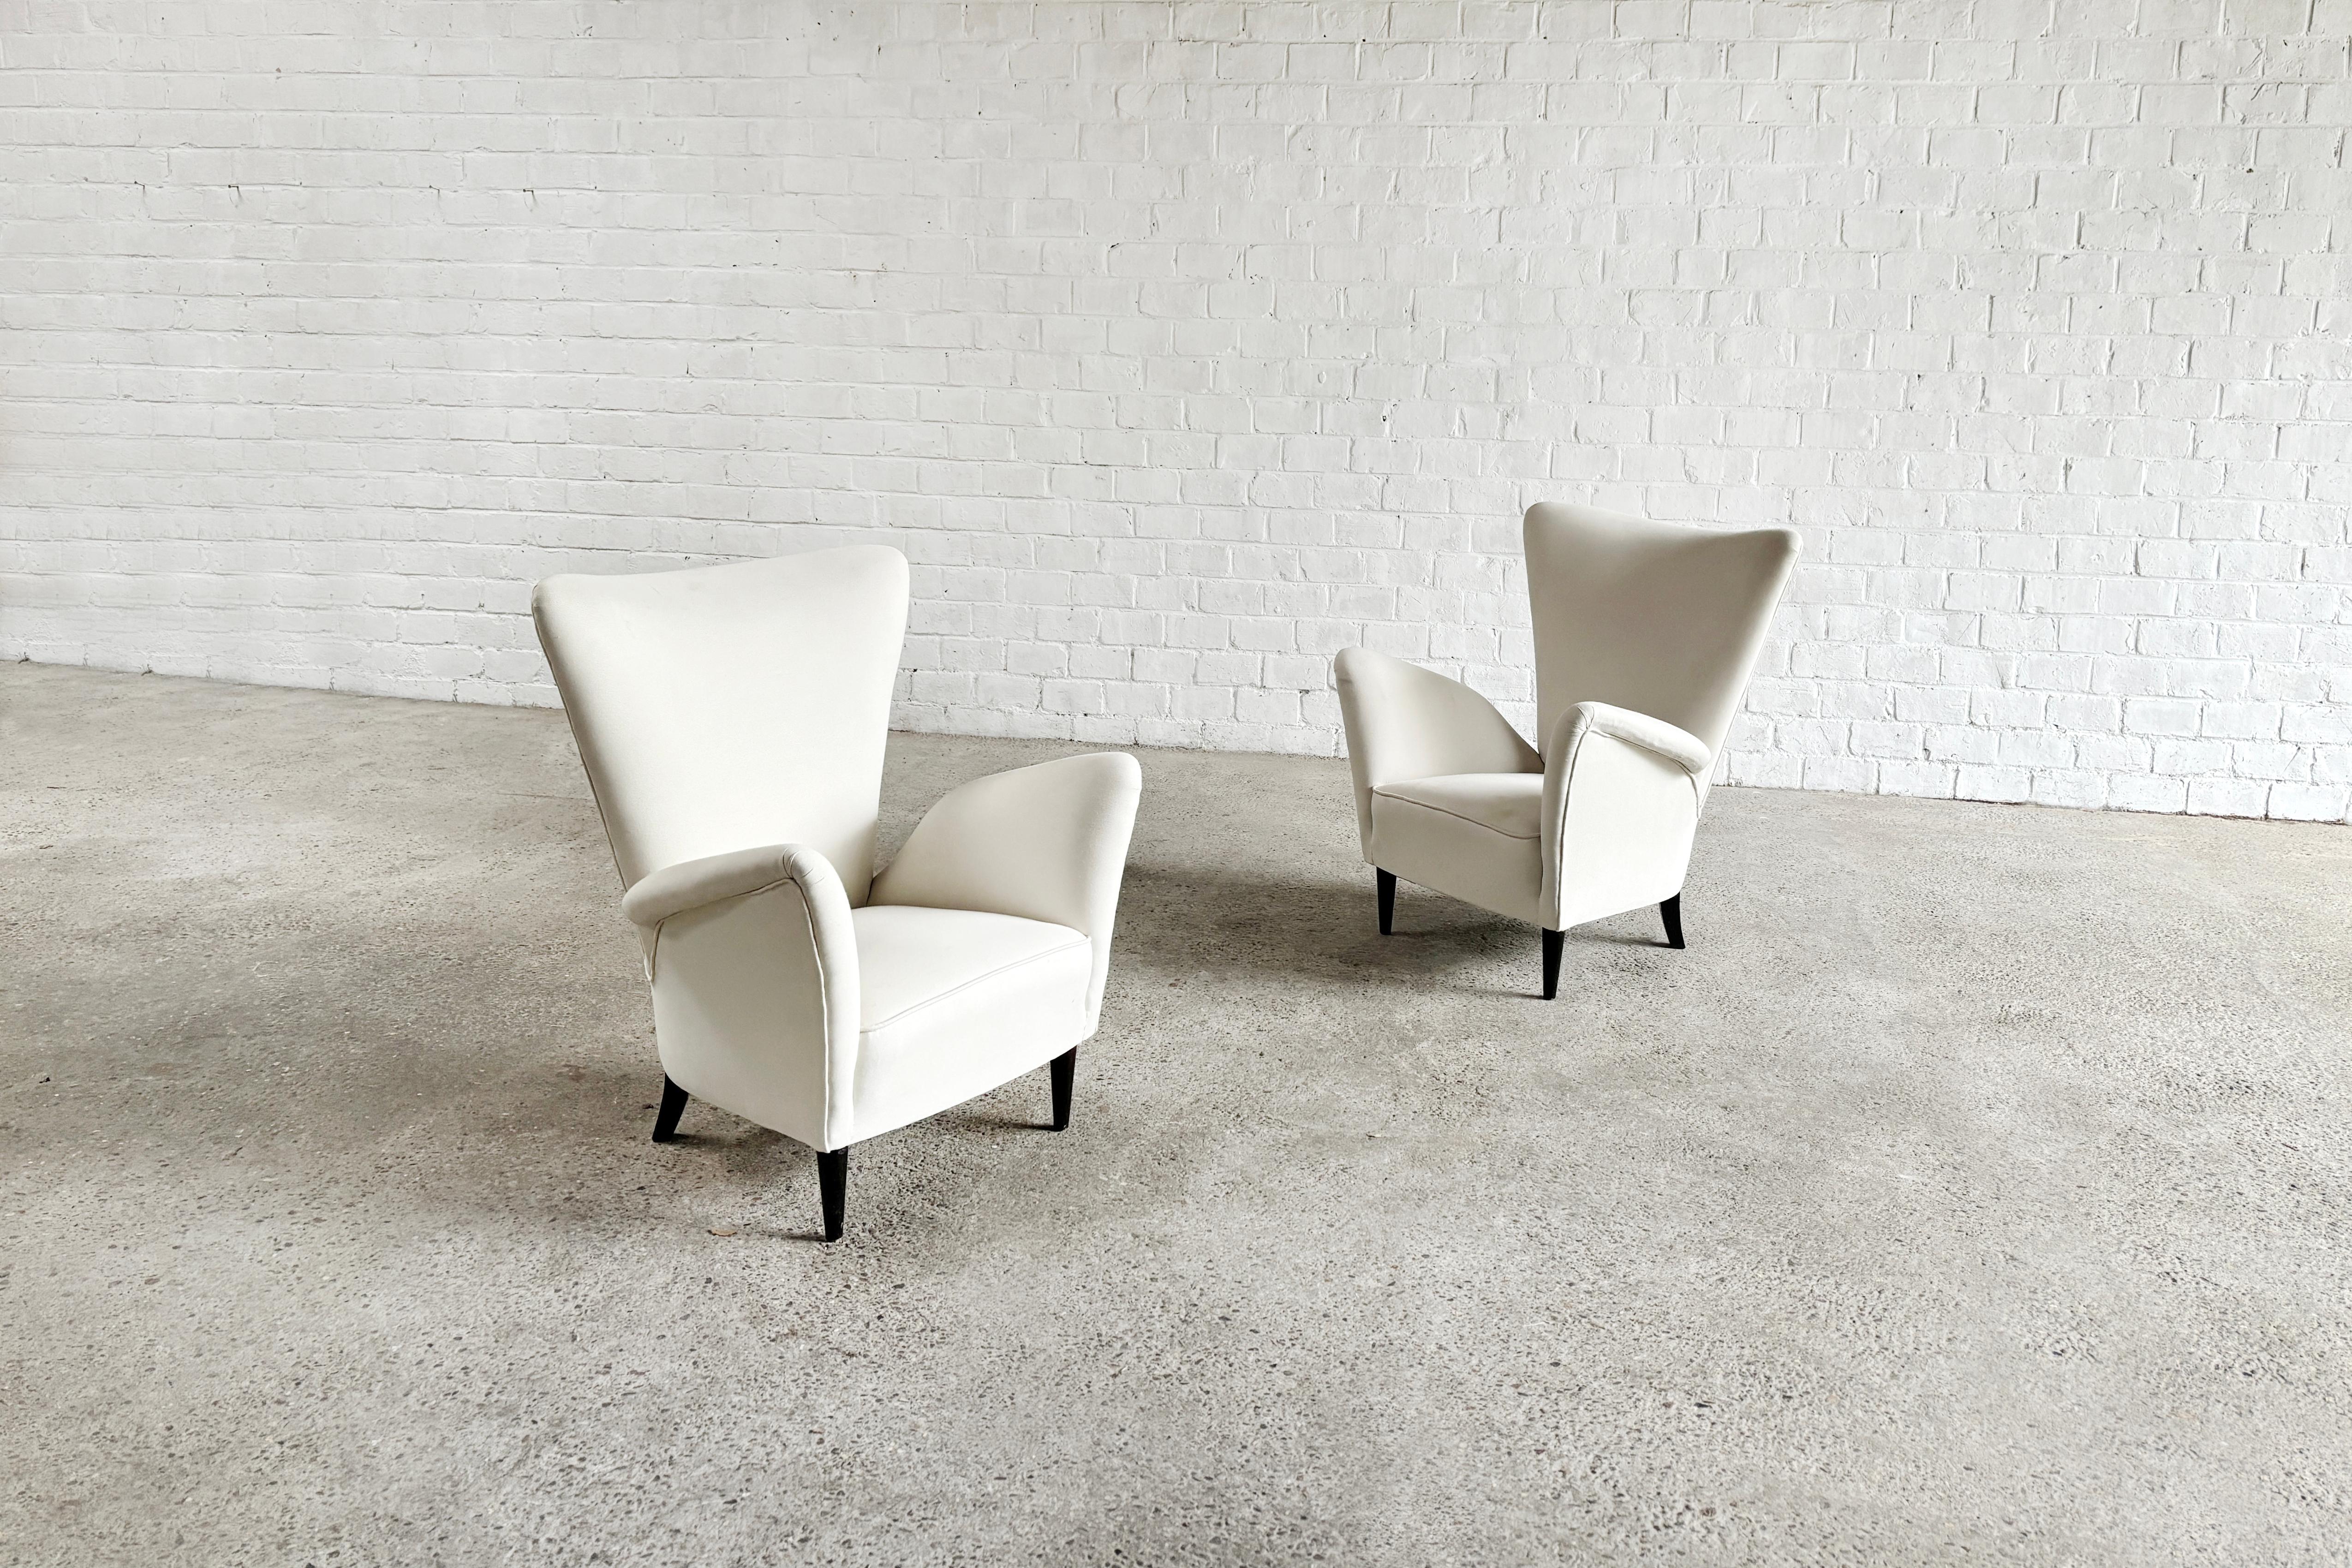 Mid-20th Century Italian Armchairs By Gio Ponti For Hotel Bristol Merano, 1950's For Sale